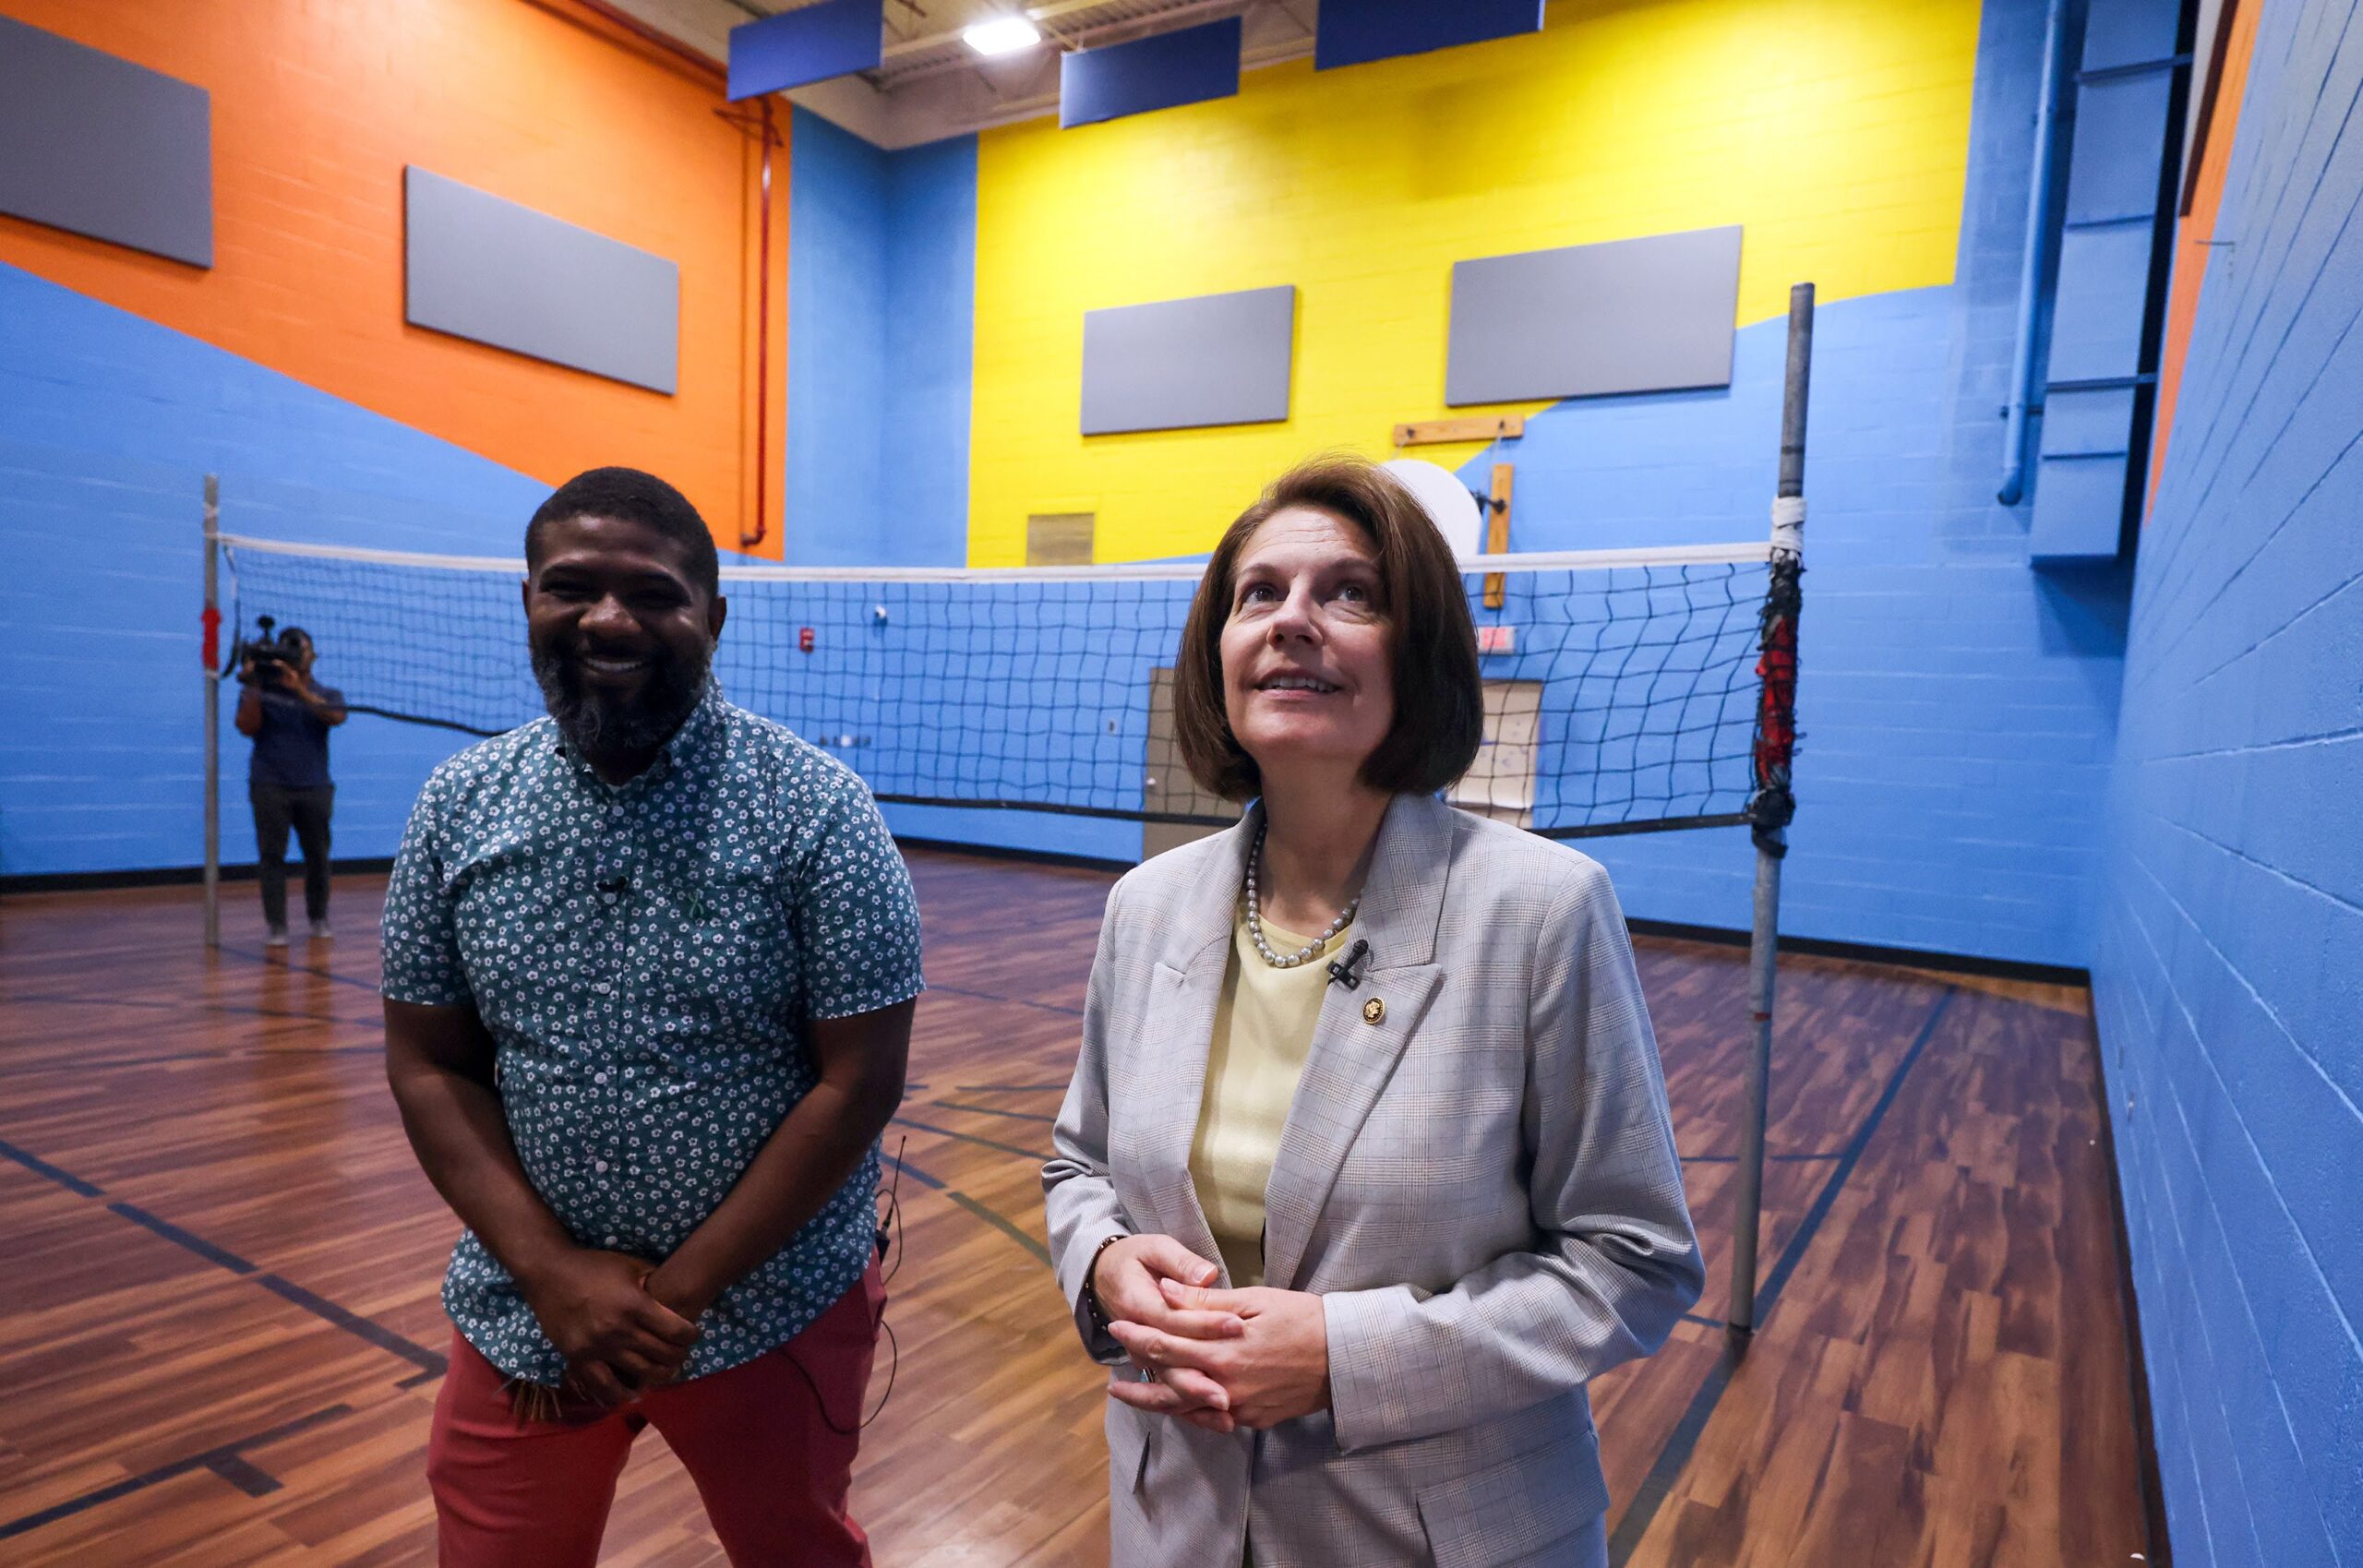 U.S. Senator Catherine Cortez Masto (D-NV) views a gym with Ken Holland, Milieu Director at Desert Winds Hospital, during a tour of the new mental health care facility in Las Vegas on Thursday, July 6 2023. (Jeff Scheid/The Nevada Independent).